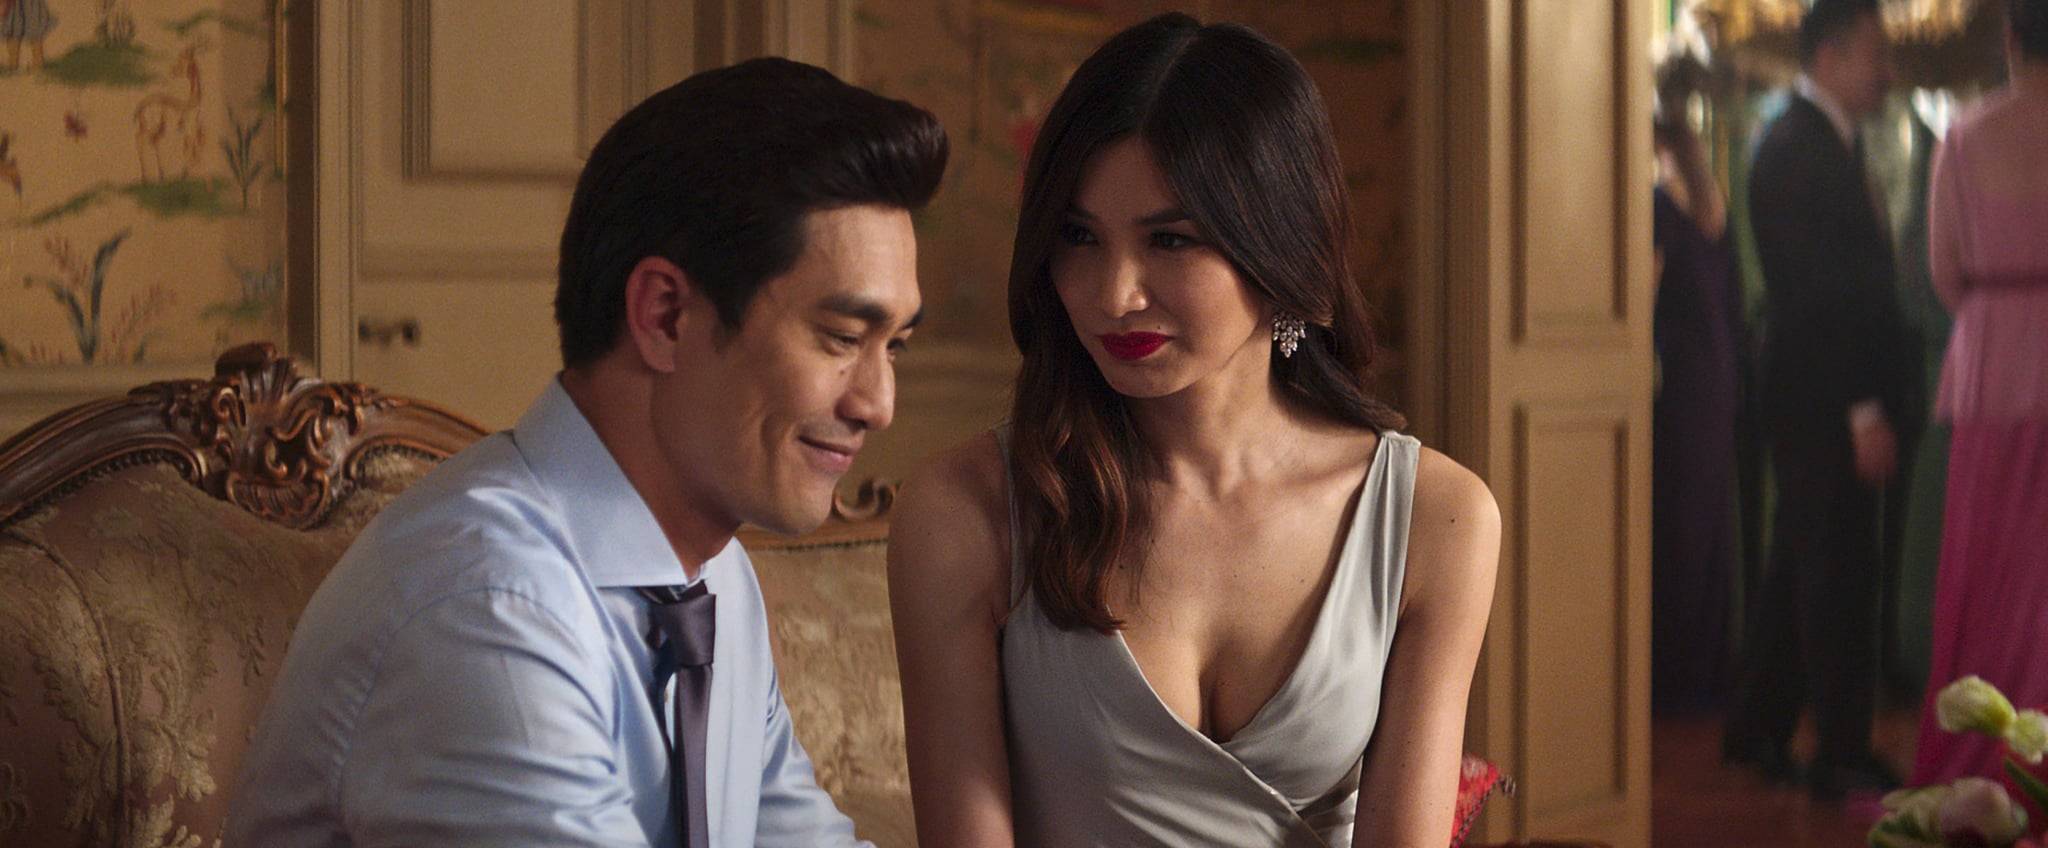 Crazy Rich Asians: paving the way for diverse tales in film